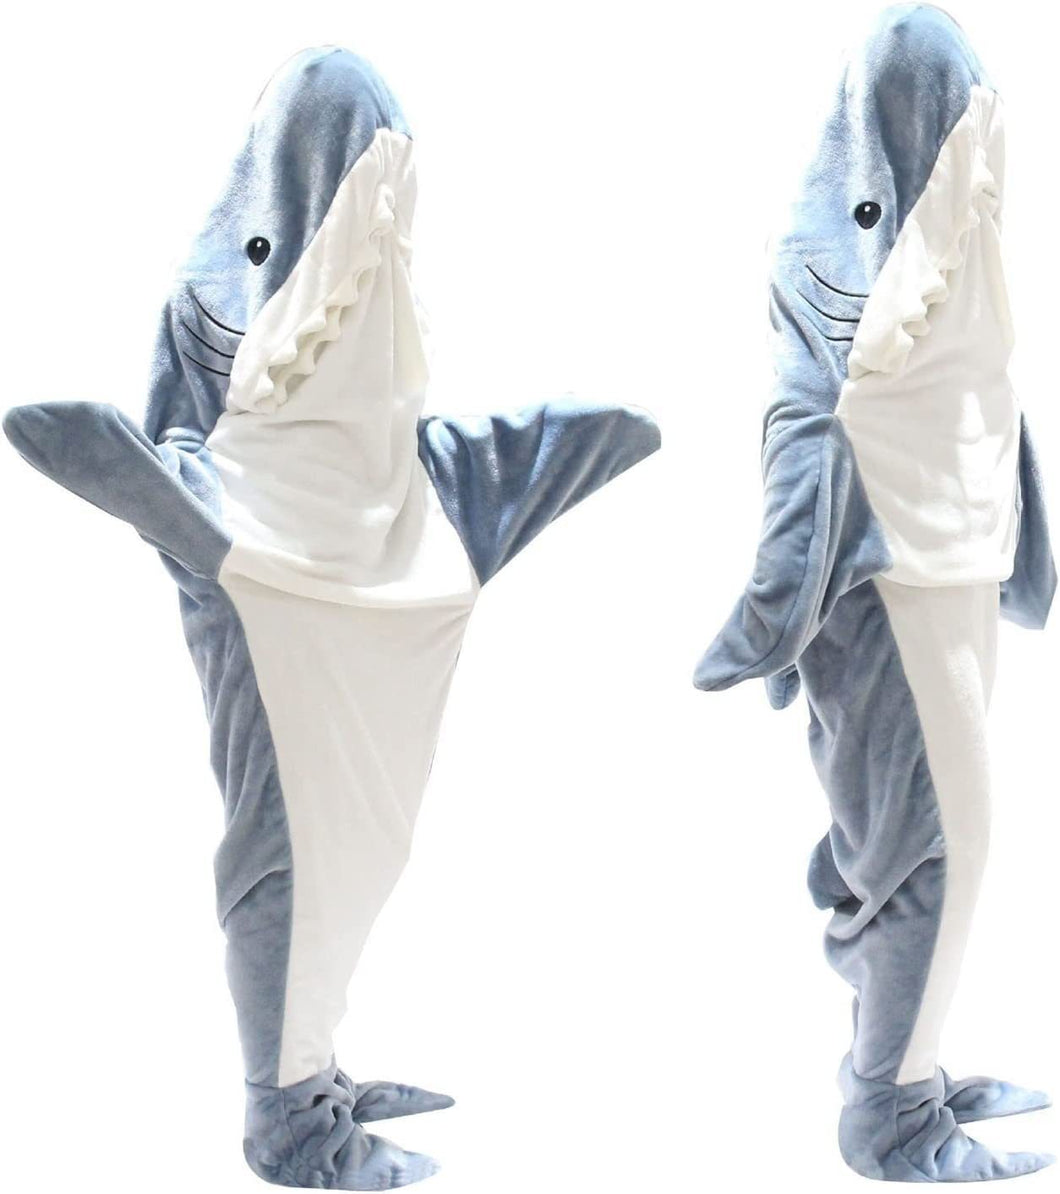 black friday sales on use this cute shark outfit as your me time space and keep you warm during the winter